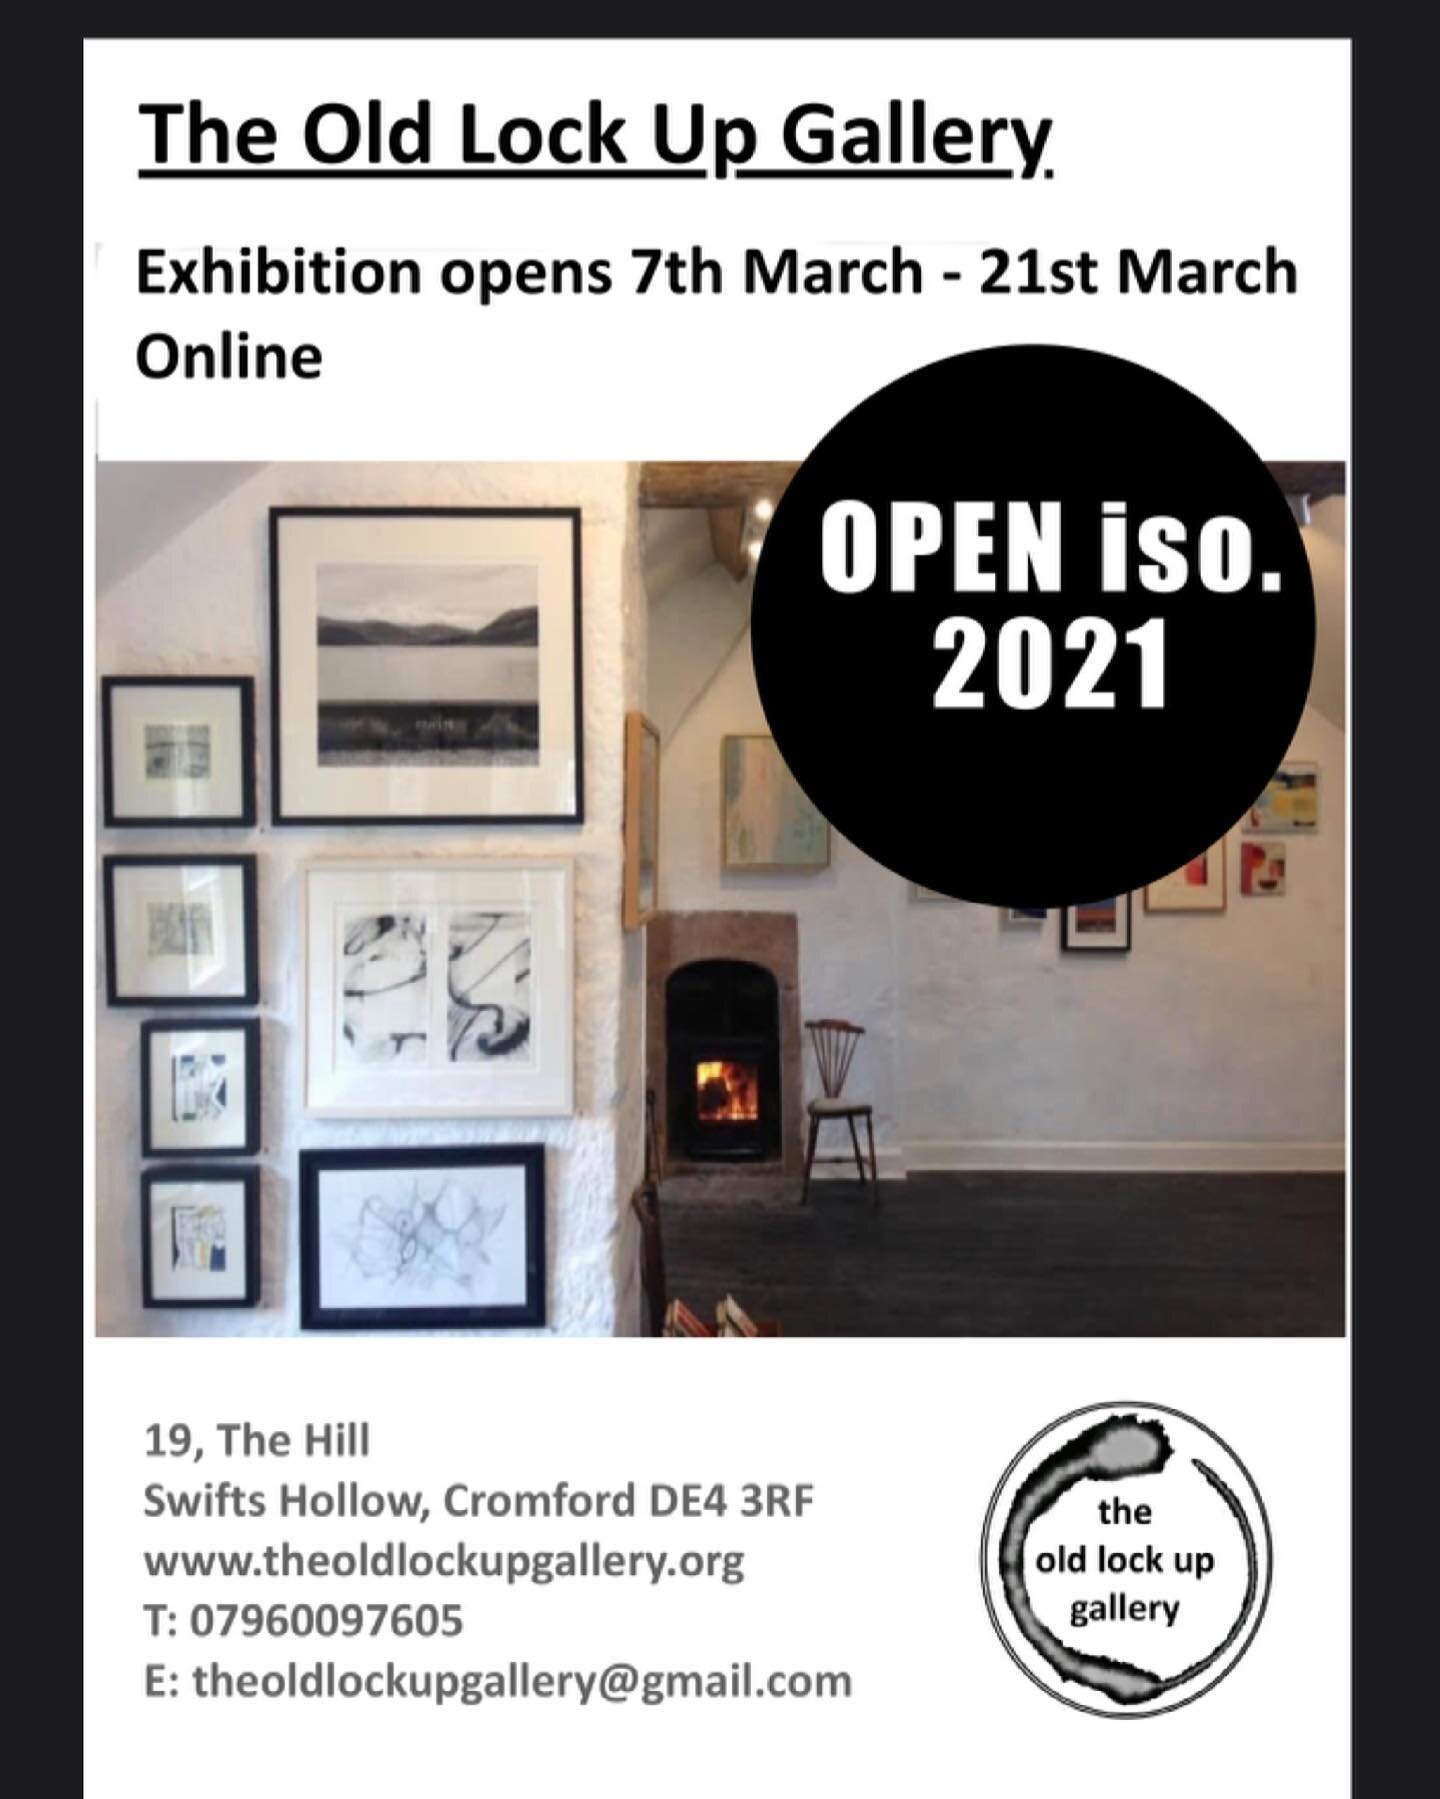 This wonderful independent gallery stages such thoughtful and creative exhibitions. It&rsquo;s such a beautiful stone building too and well worth visiting when galleries open up soon. Meanwhile, their yearly #Open #exhibition features lots of superb 